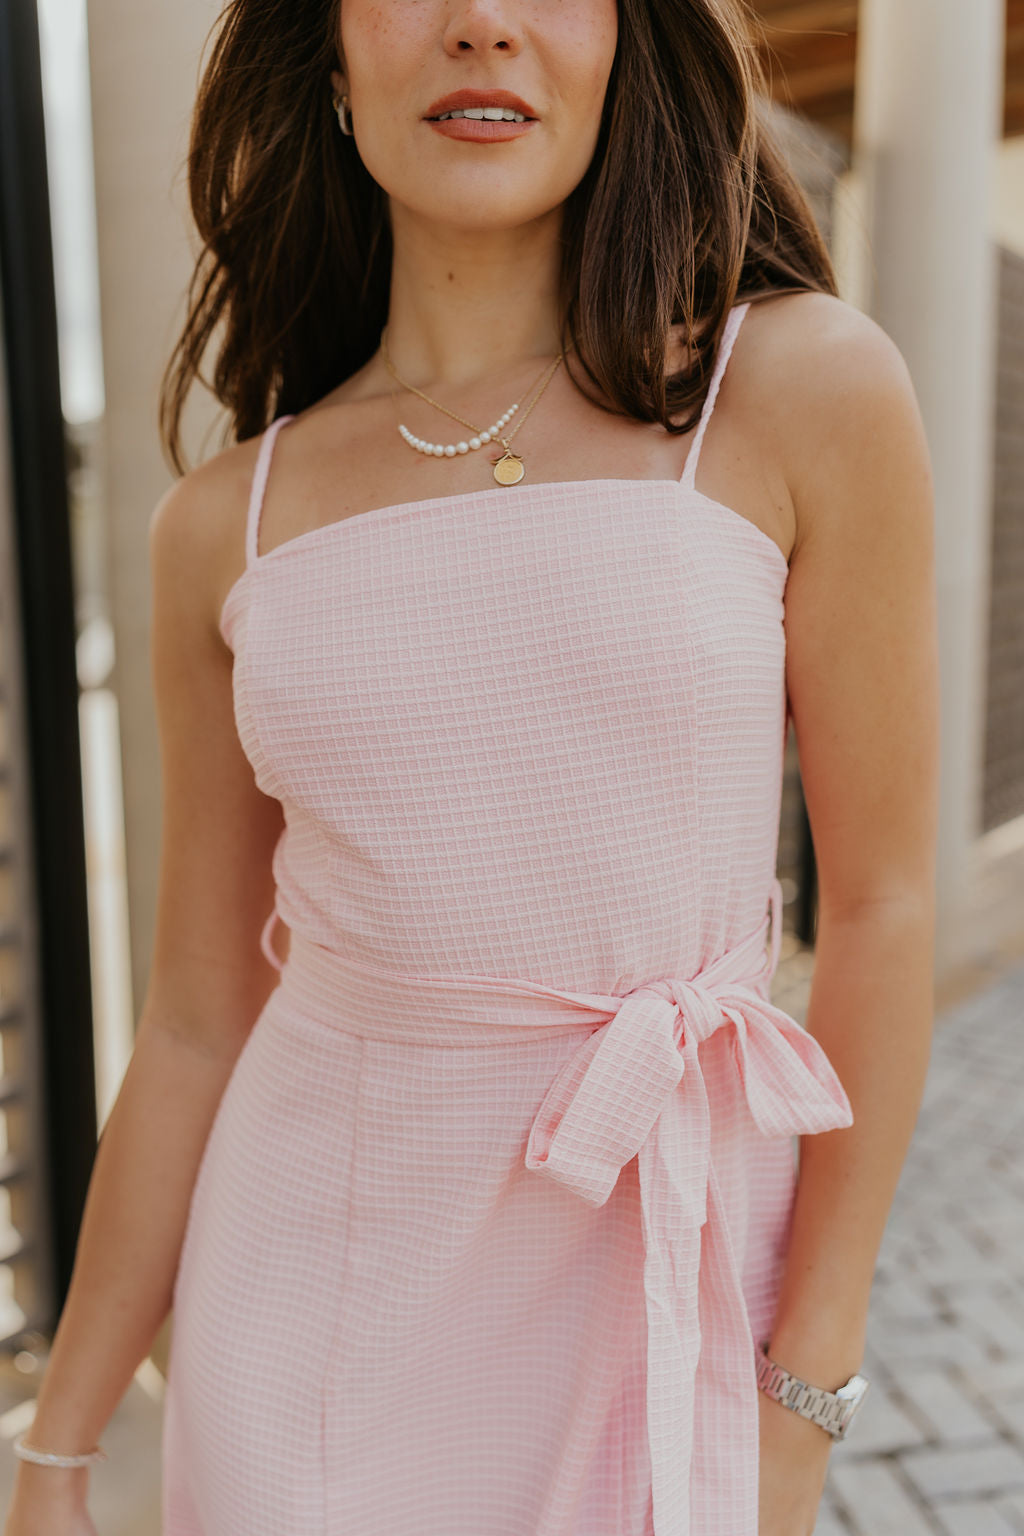 Close up view of female model wearing the Valeria Baby Pink Tie Mini Dress which features Light Pink Lightweight Fabric, Monochrome Micro Plaid Pattern, Light Pink Lining, Mini Length, Tie Waistband, Square Neckline, Adjustable Straps and Back Zipper with Hook Closure